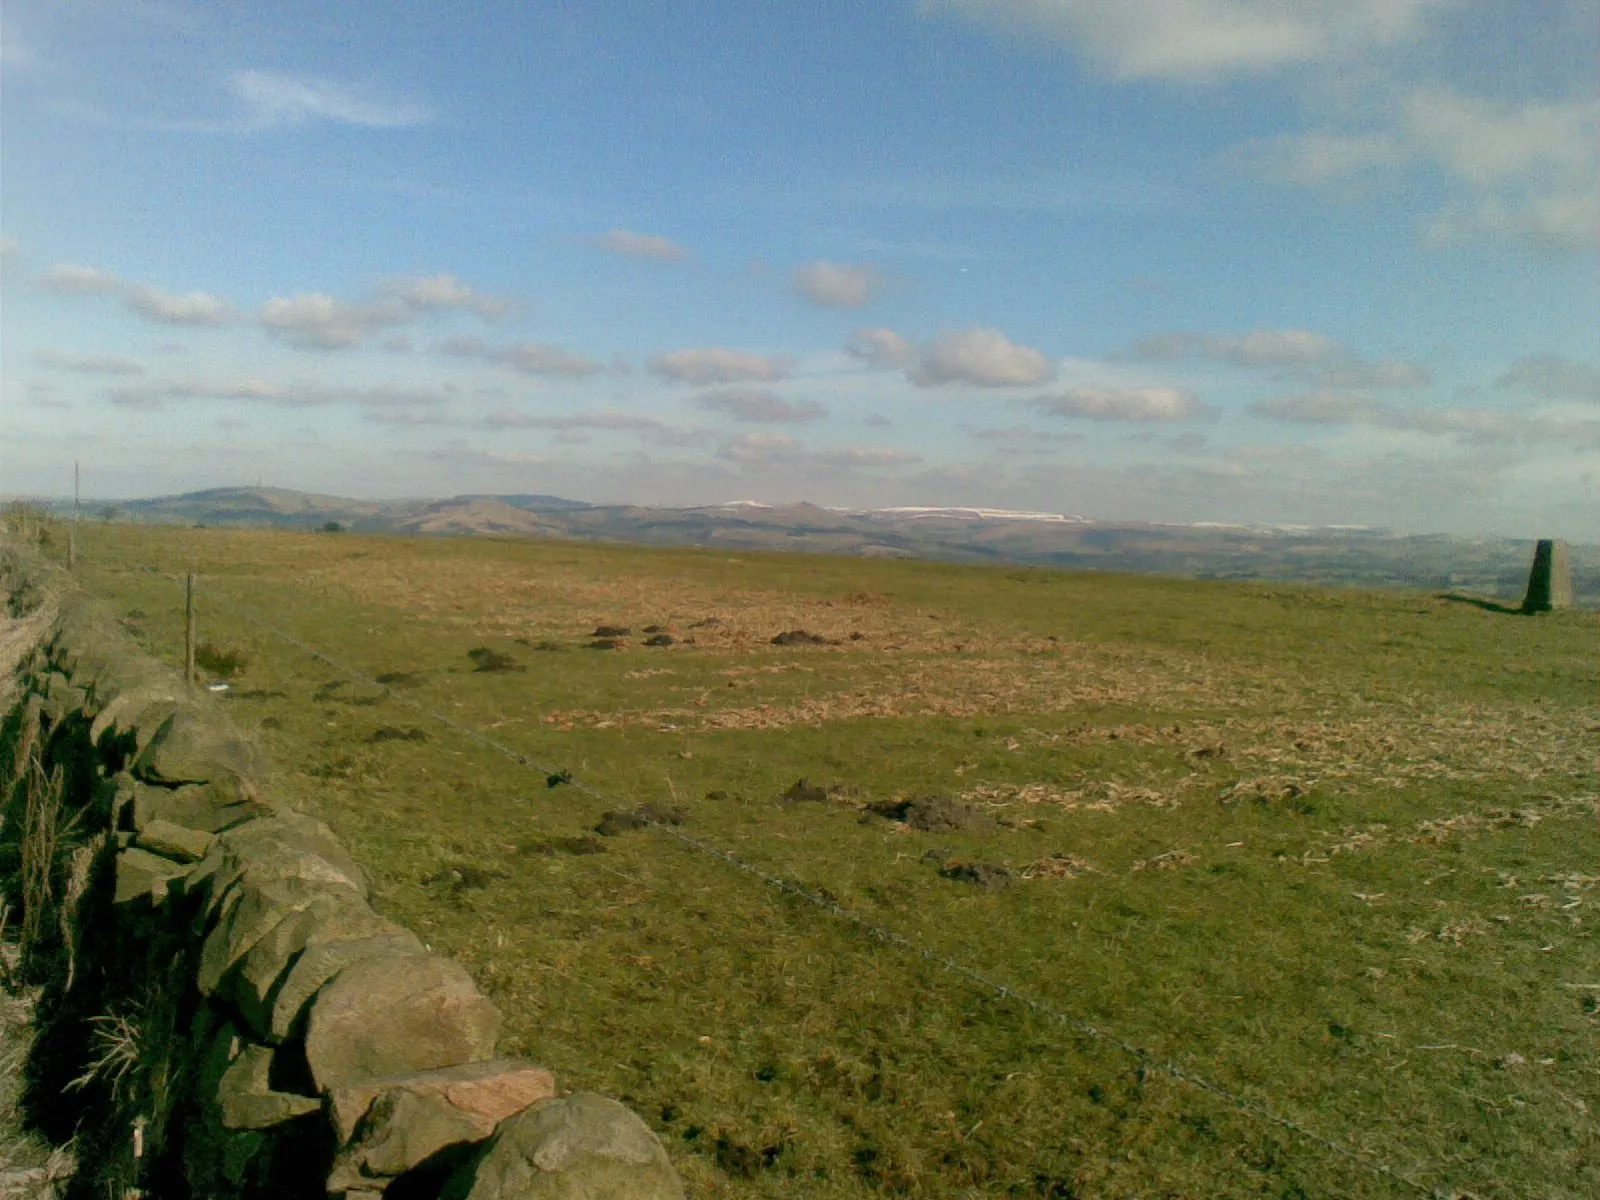 Photo showing: Still snow on the tops From the minor road adjacent to trig point 336 (extreme right of picture) looking towards the Derbyshire Peaks around Buxton where some of the winter snow awaits the warm spring sunshine.  The tower at extreme left of image is the radio mast at Sutton Common, overlooking the A54/A523 road junction and often known locally as "The Totem Pole".